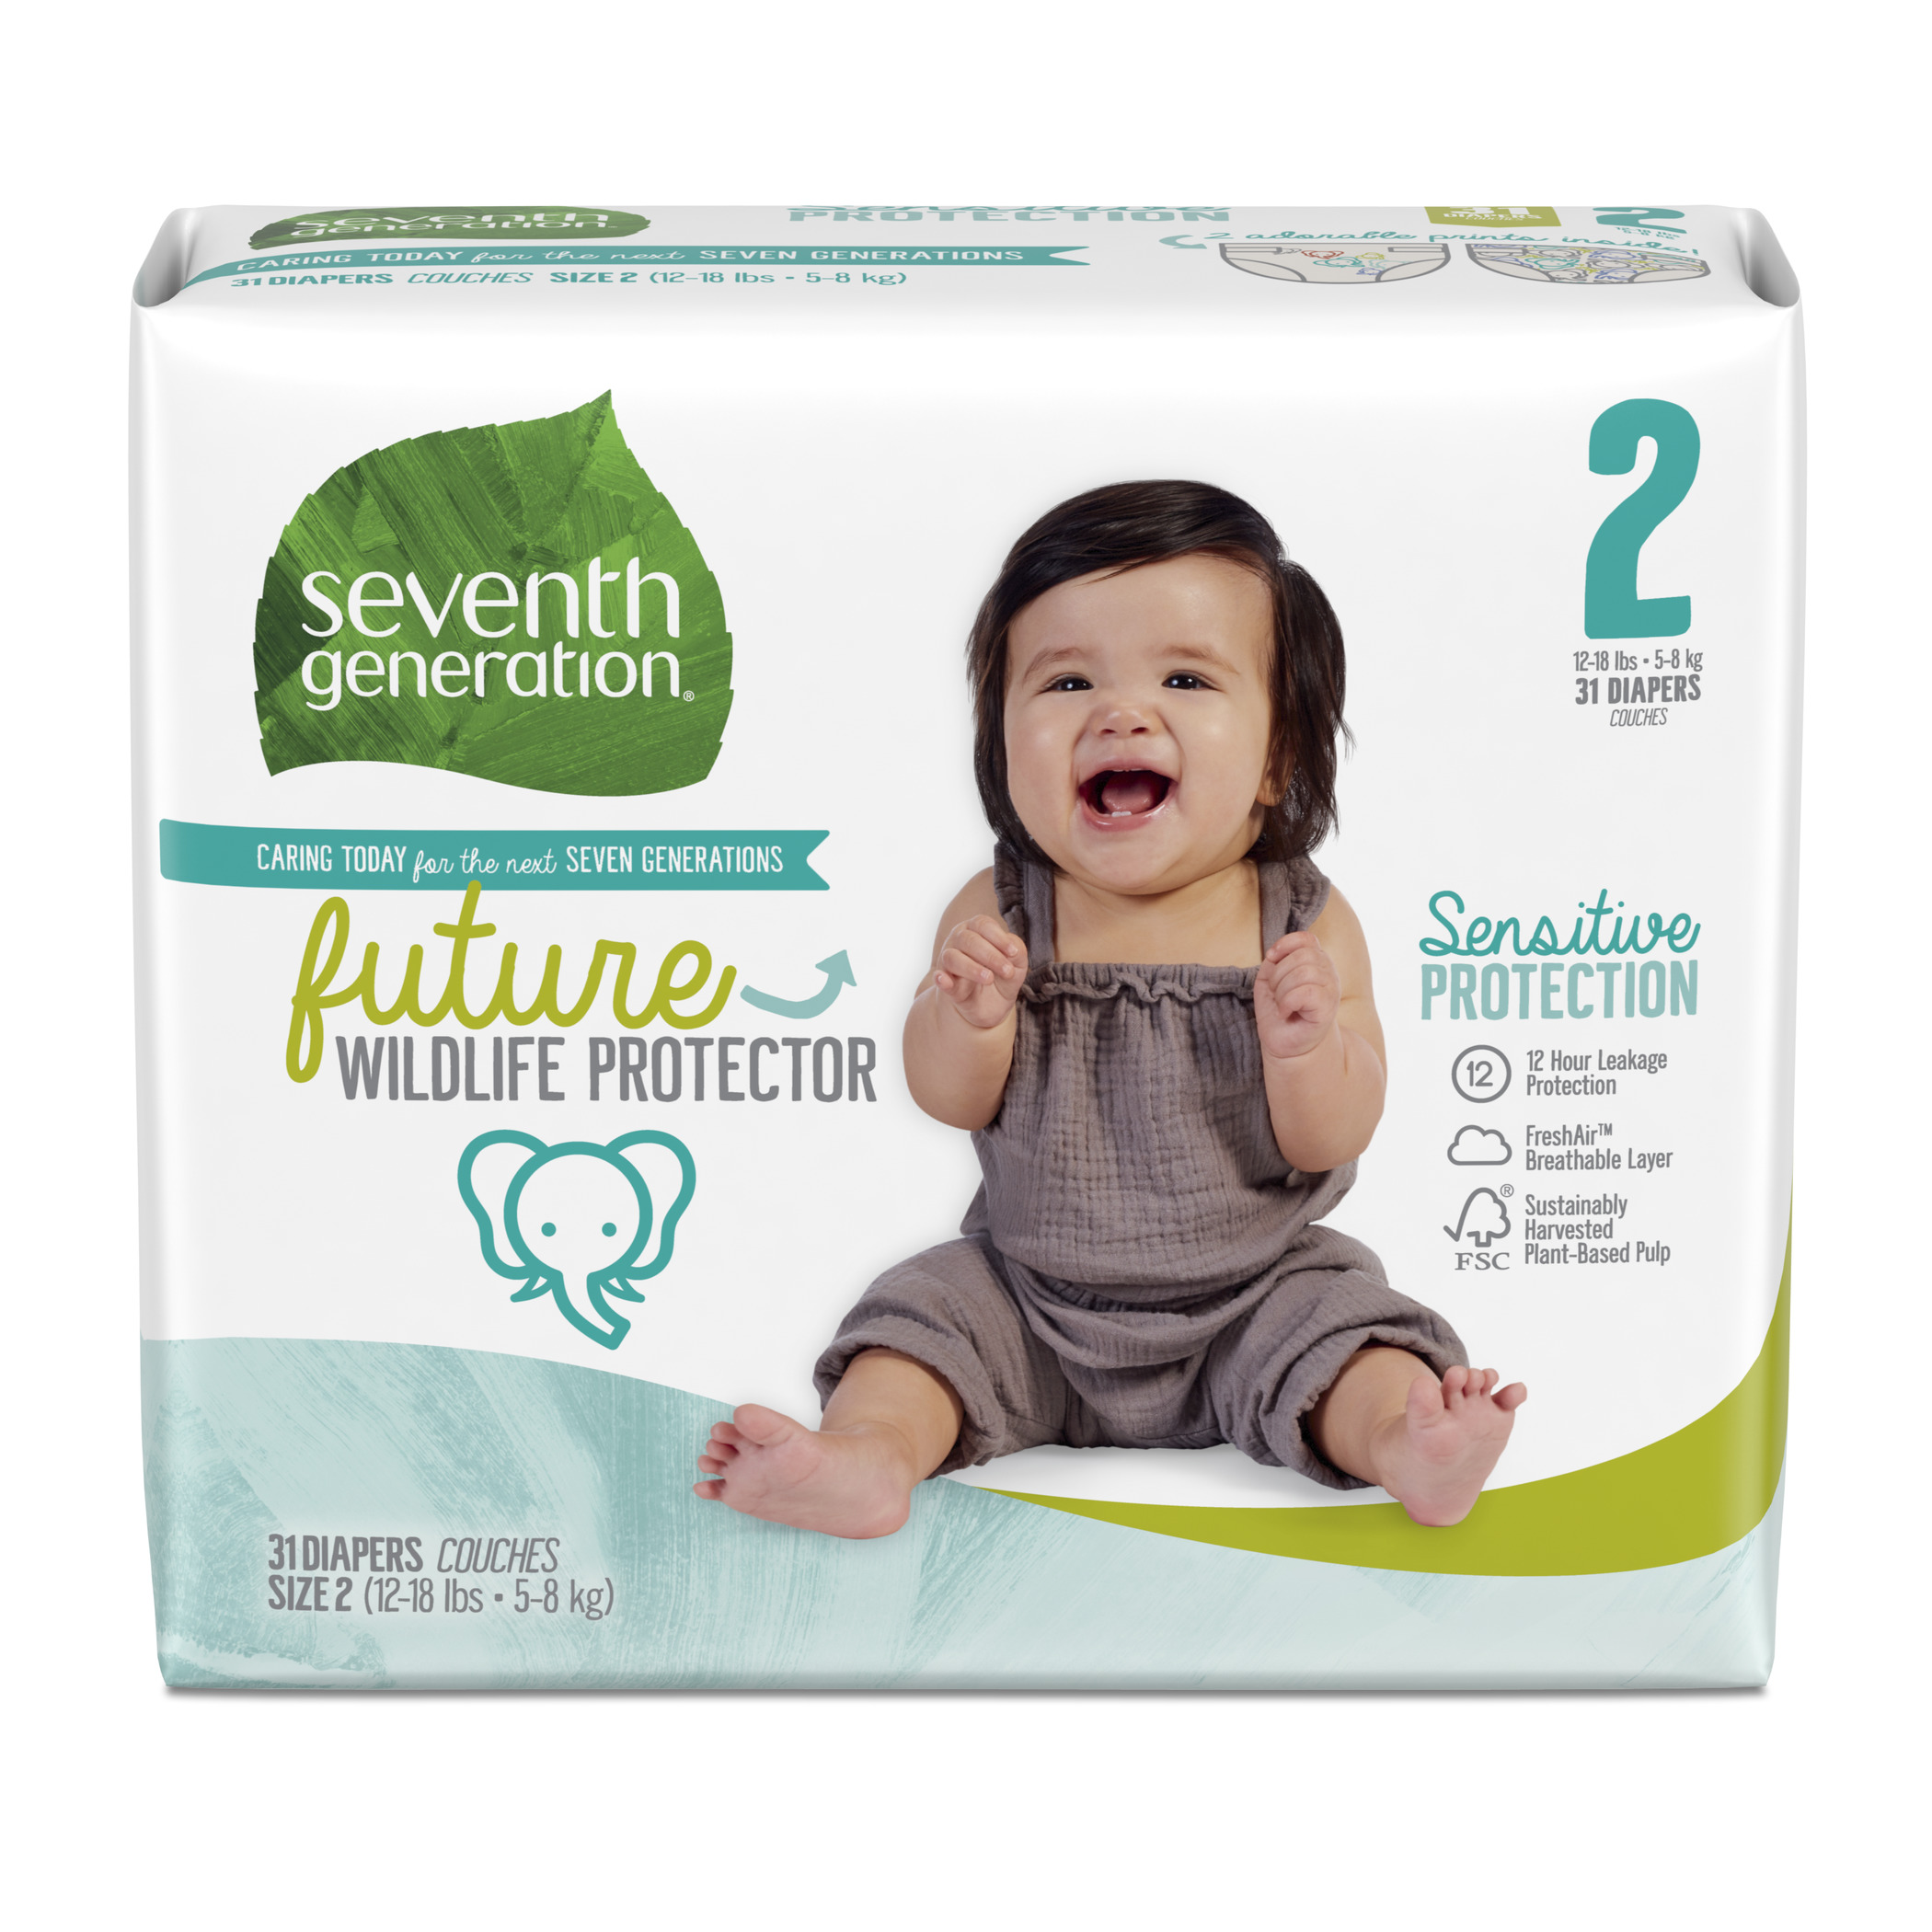 2 month baby diaper size